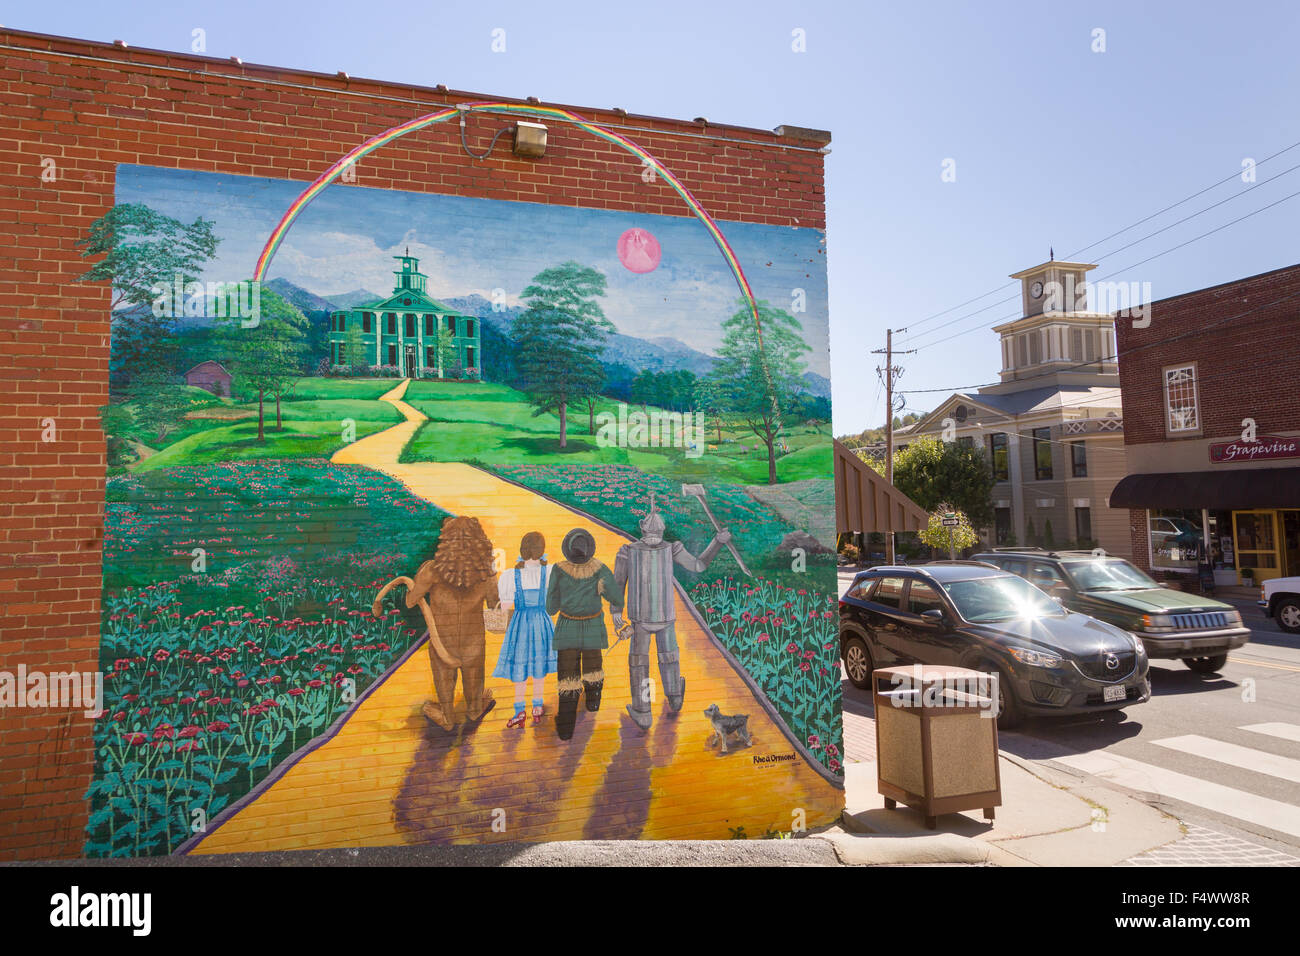 A mural of the the Wizard of Oz painted on the side of a building in the tiny village of Burnsville, North Carolina. Burnsville is the start of the Quilt Trail which honors handmade quilt designs of the rural Appalachian region. Stock Photo